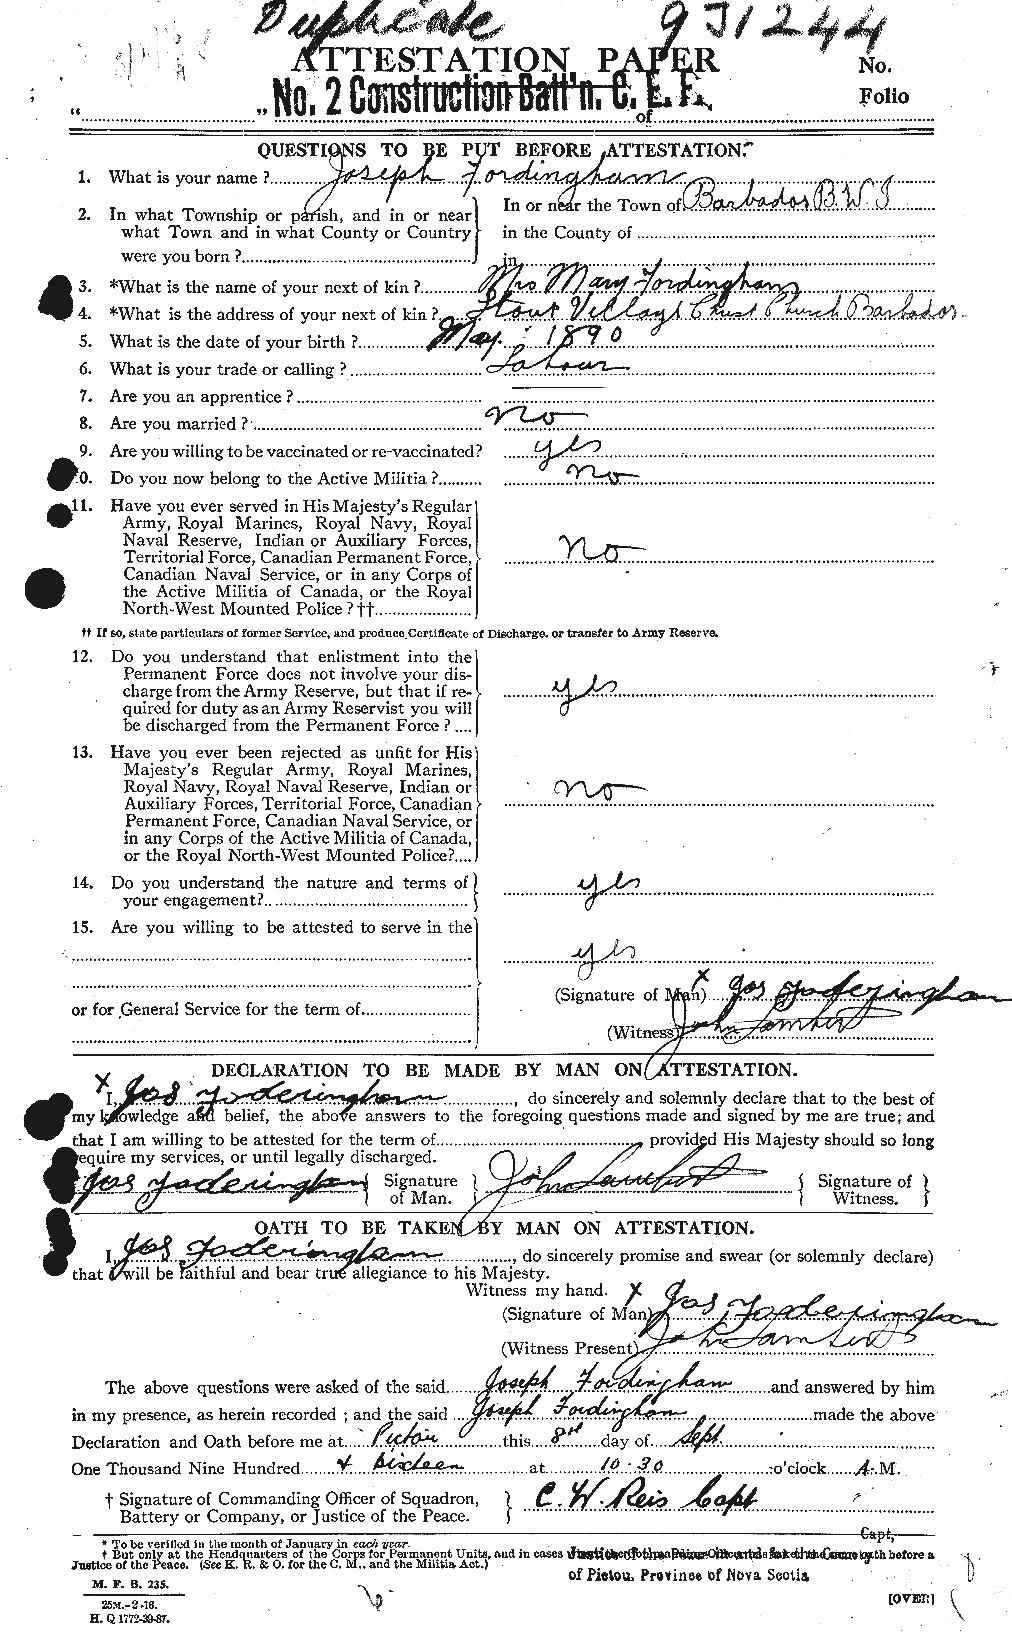 Personnel Records of the First World War - CEF 332630a